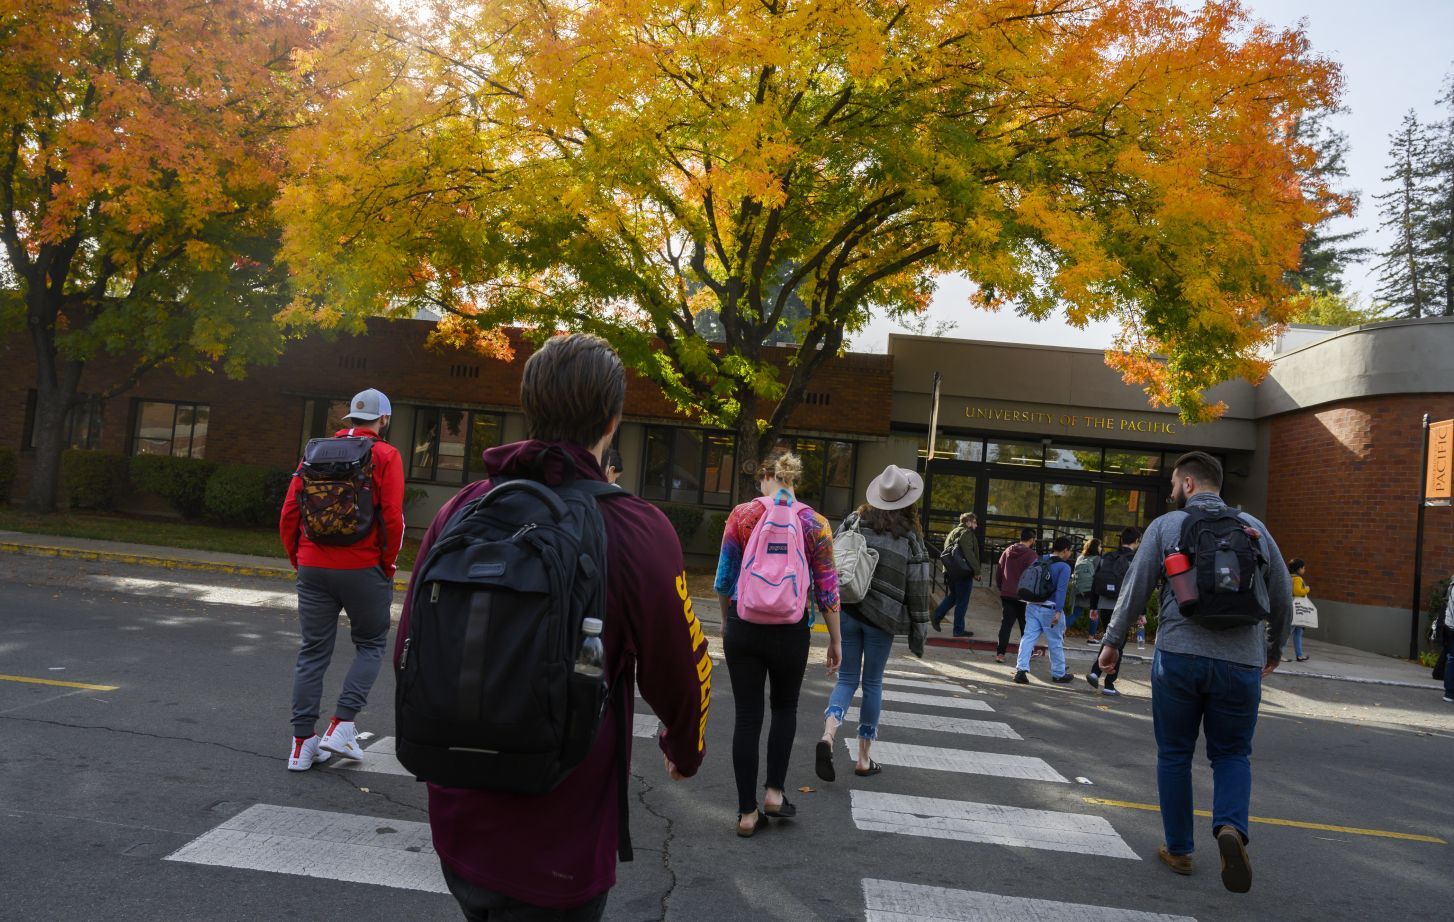 Students wearing backpacks cross the street during a fall day.